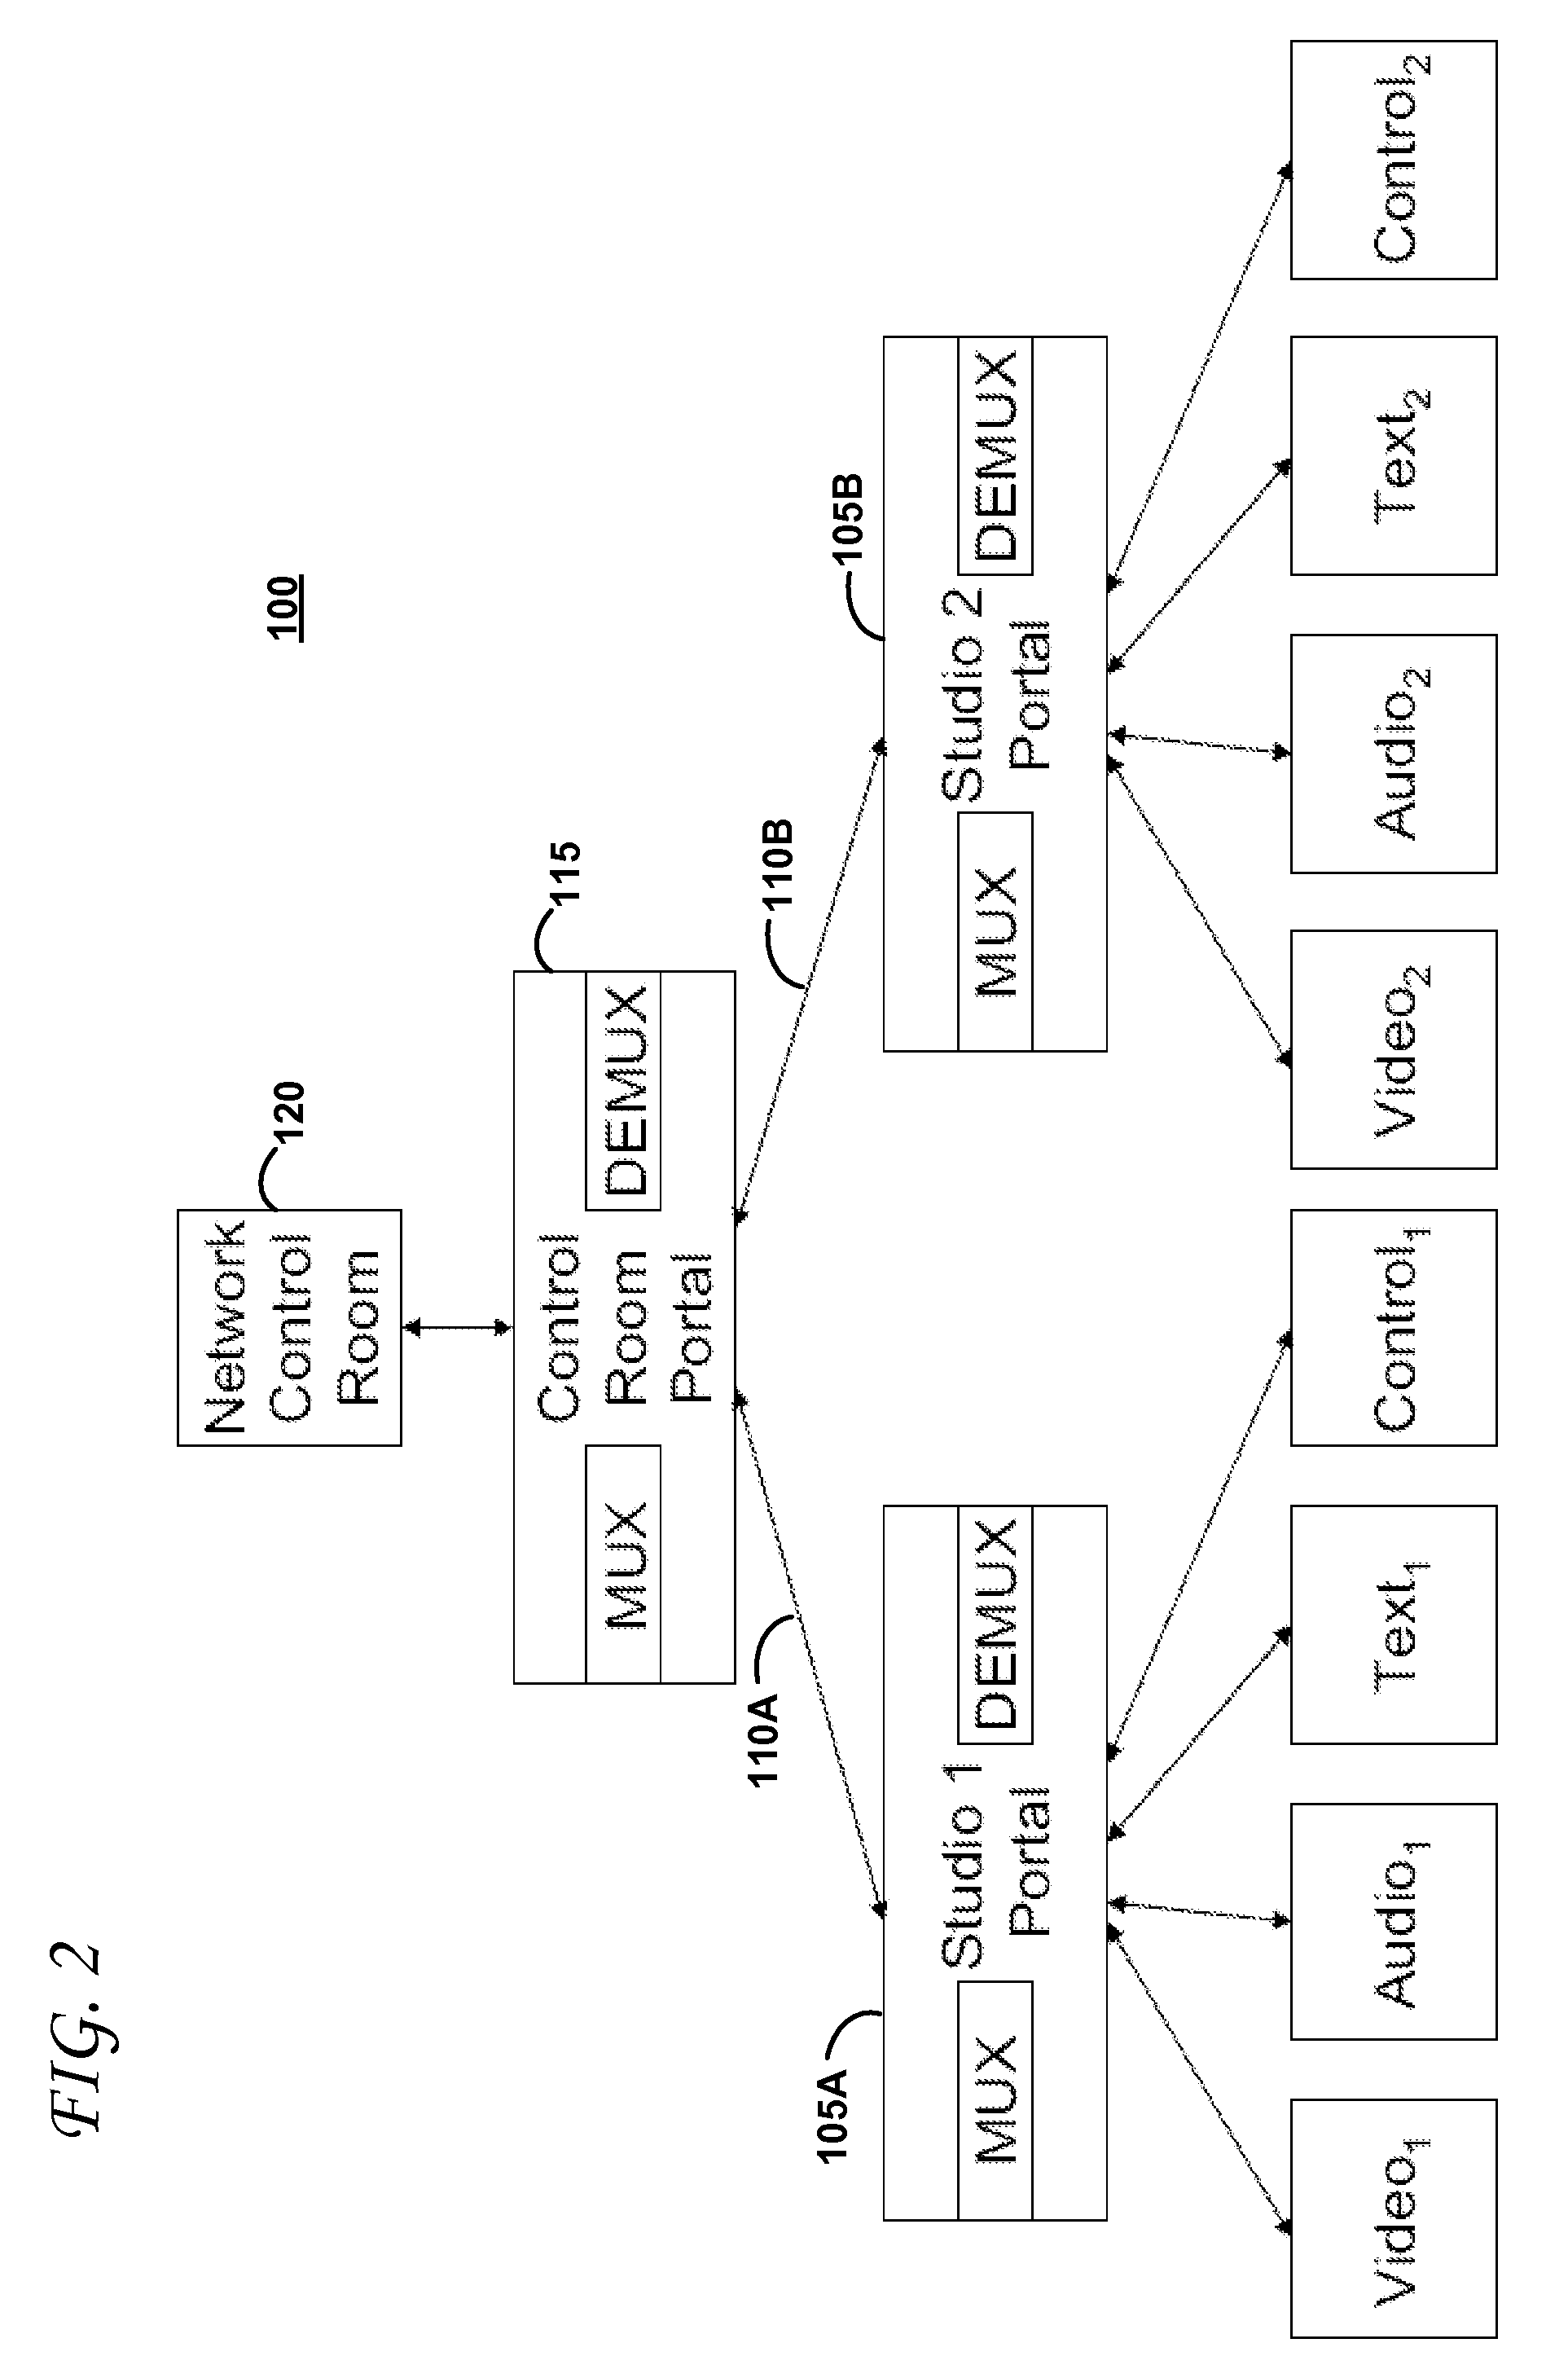 Systems and methods for remote video production